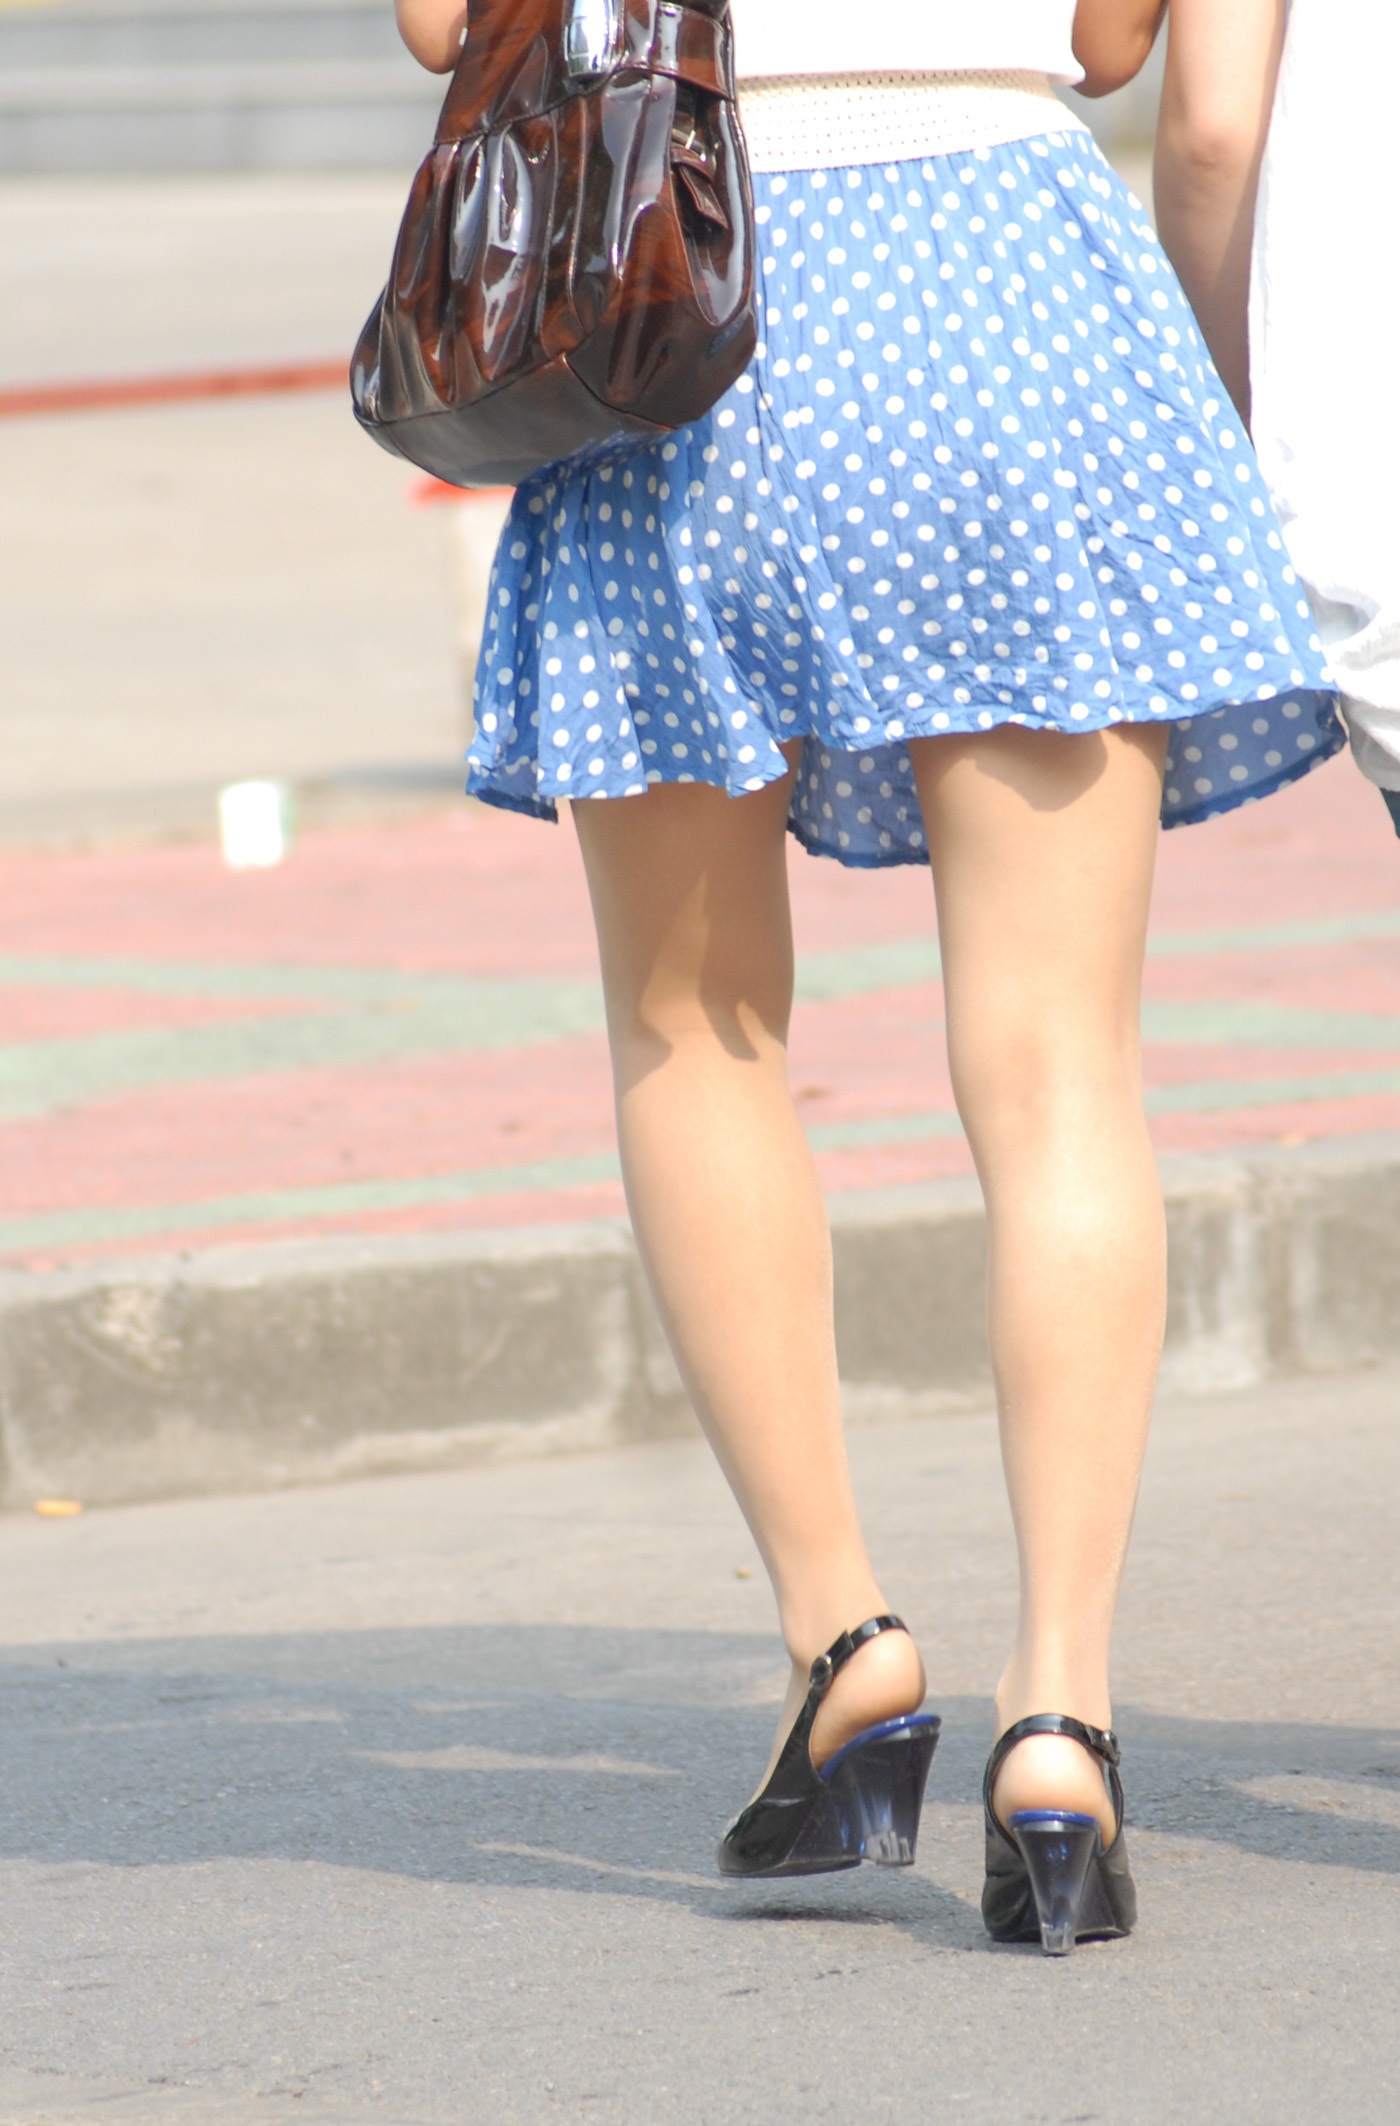 [outdoor Street Photo] on August 5, 2013, I followed her for a long time and finally showed up